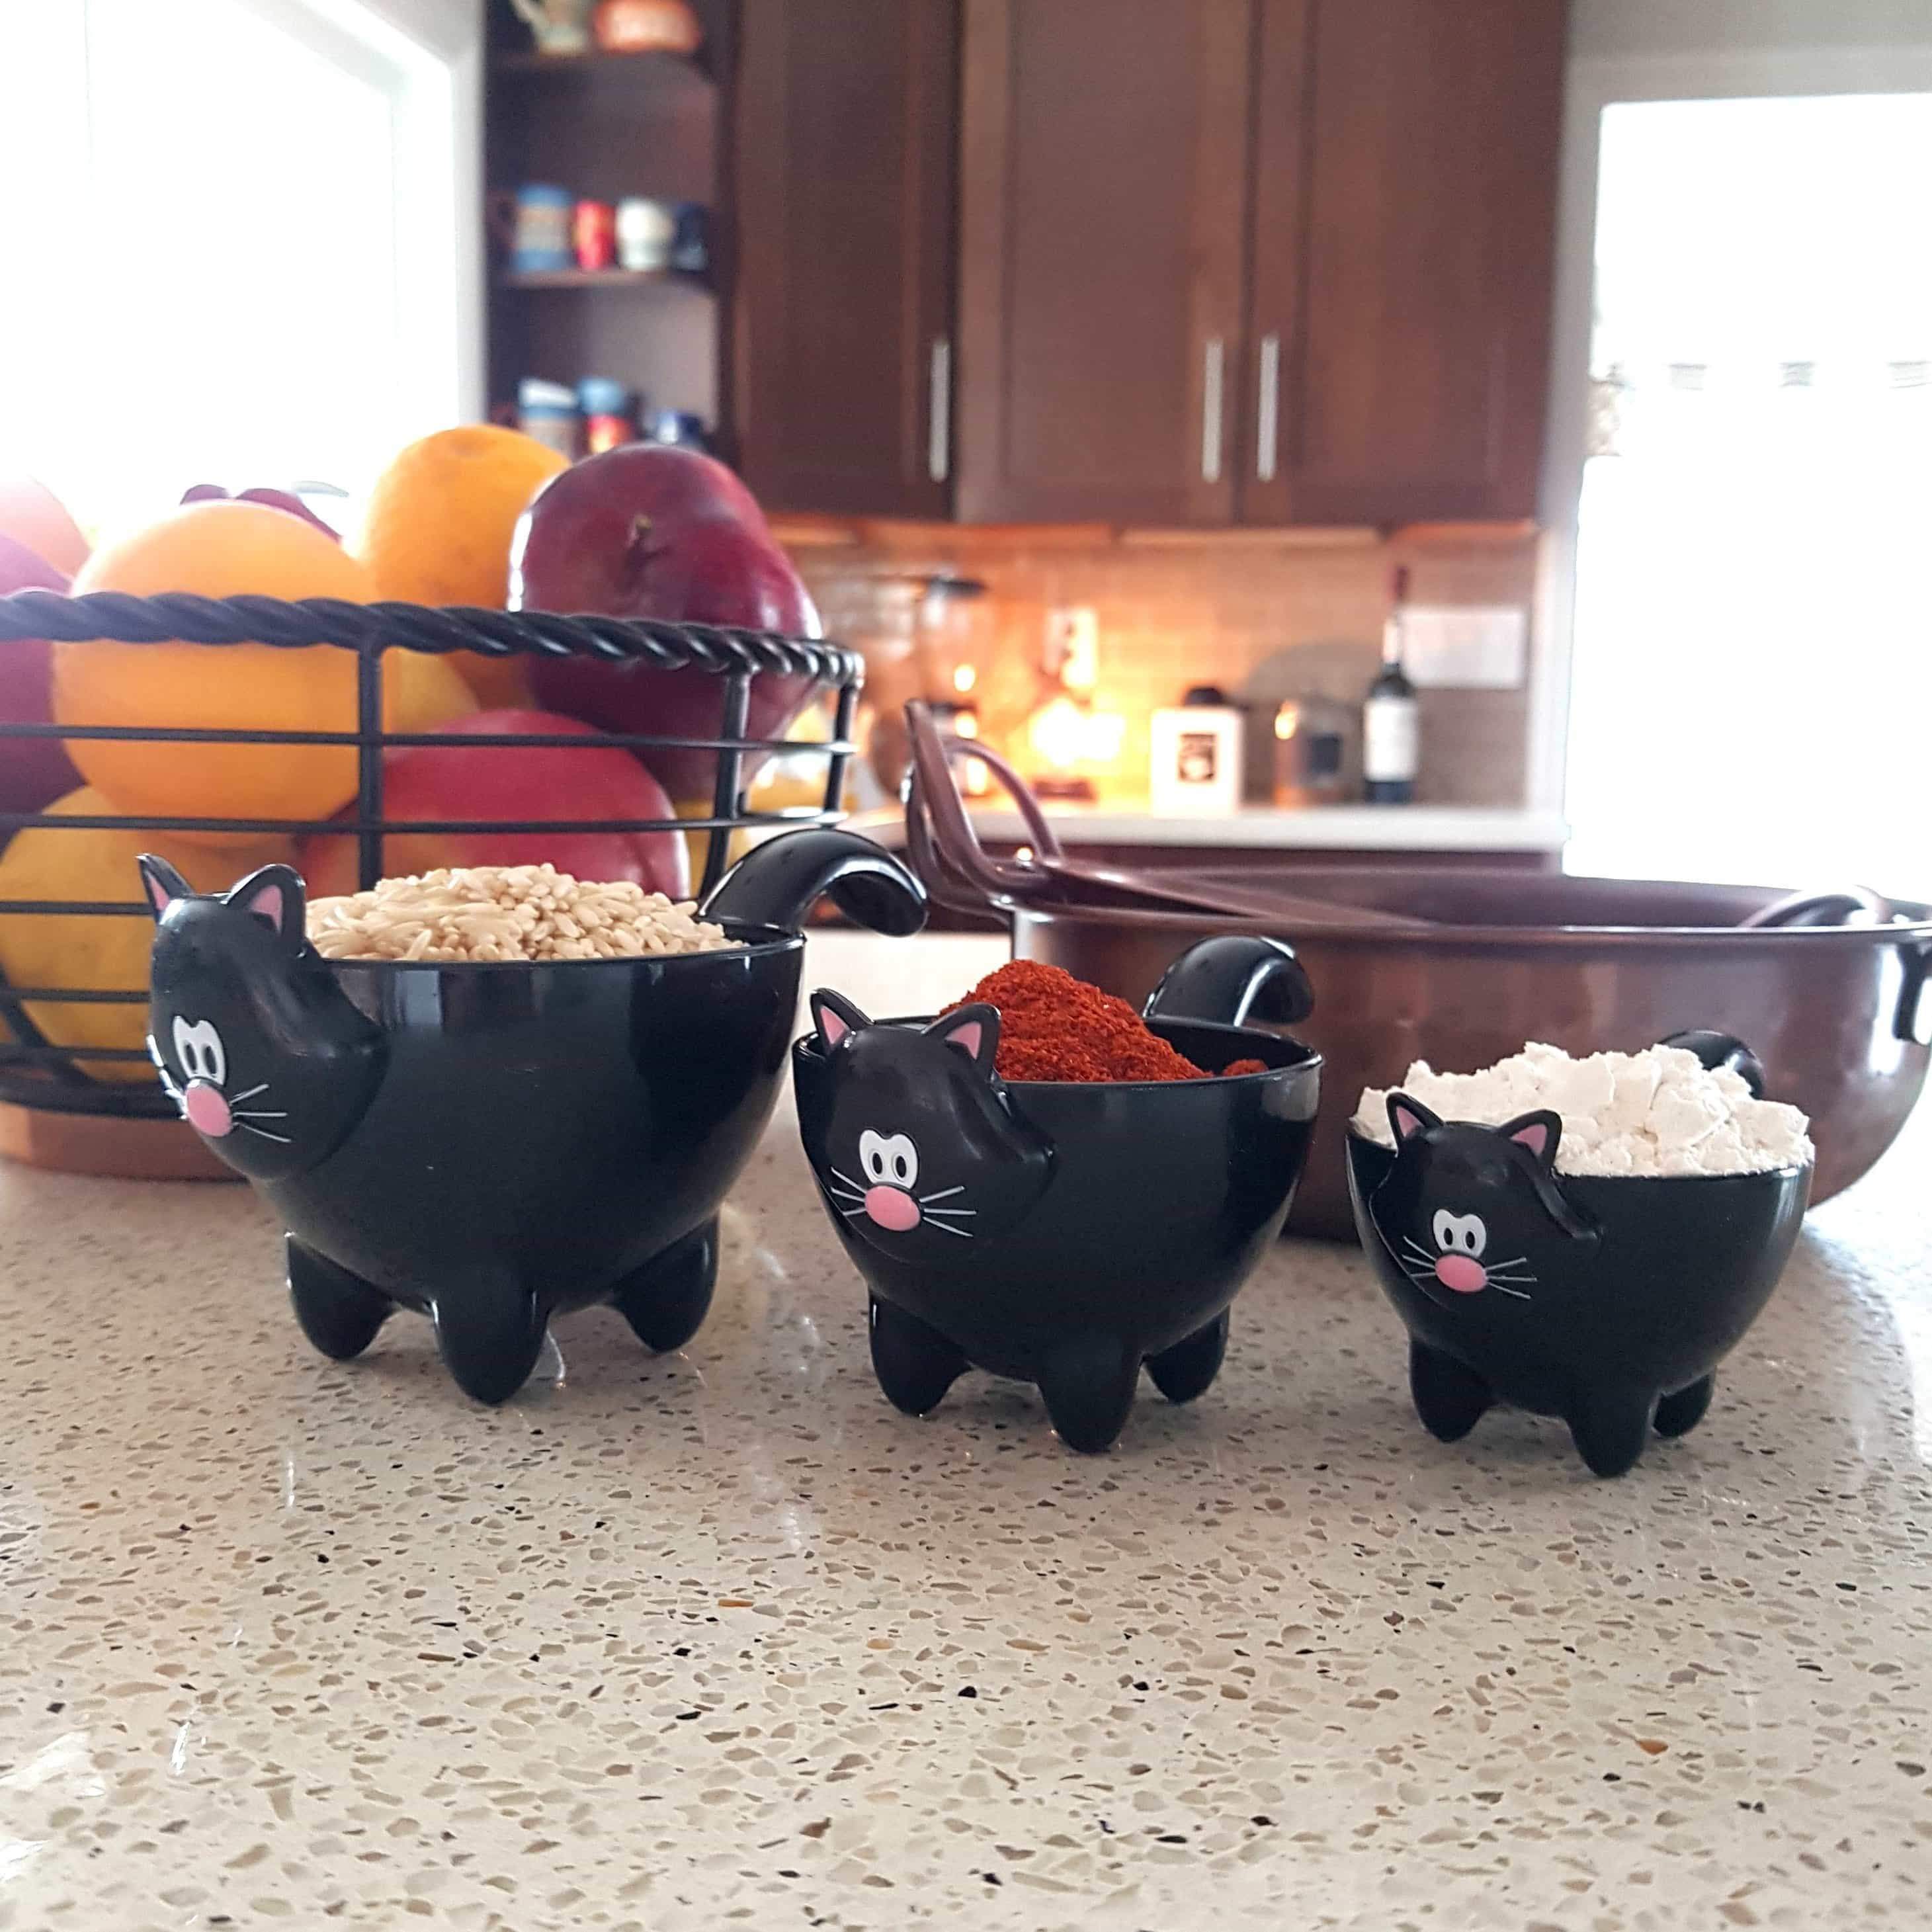 Products for Cat Lovers, Black Cat Measuring Cups